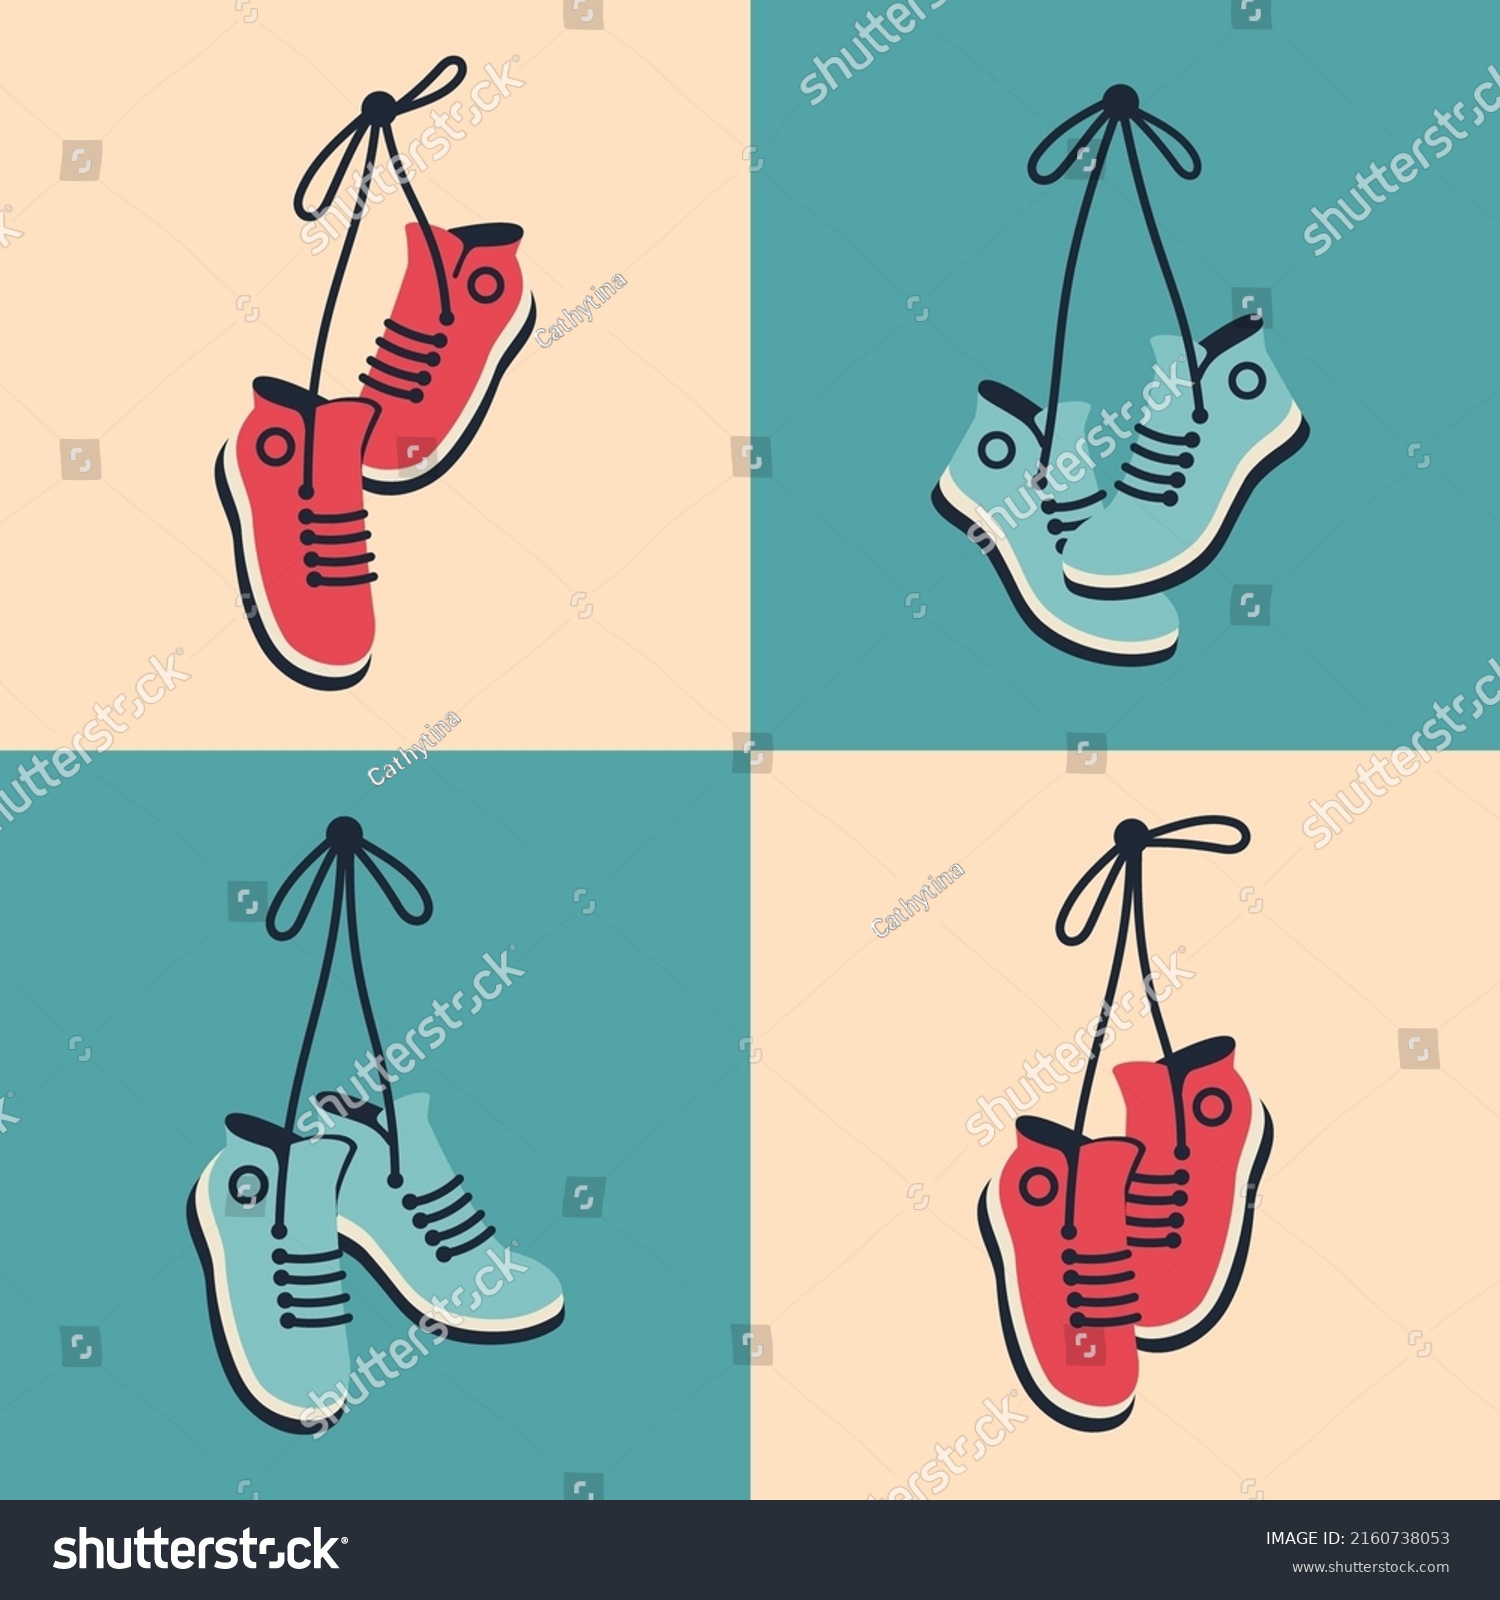 SVG of Sneakers hanging in retro style. Pair of shoes with tied laces dangling on a string. Vector flat illustration for banner, poster, cover art svg